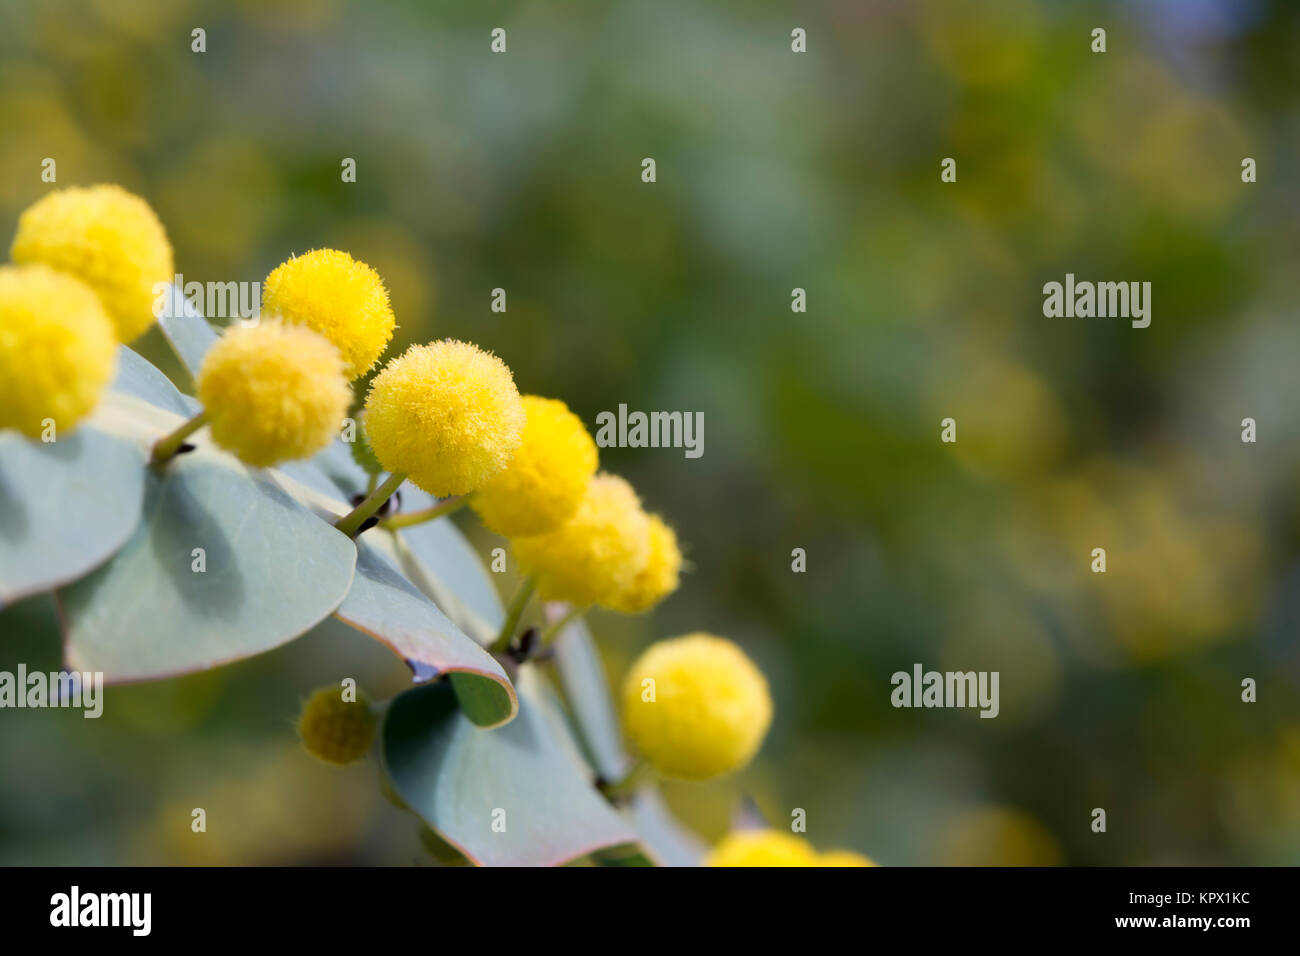 Close up of the vibrant yellow balls and unusual foliage leaves of the Acacia Glaucoptera (Flat Wattle), also known as Clay Wattle. Very shallow focus Stock Photo